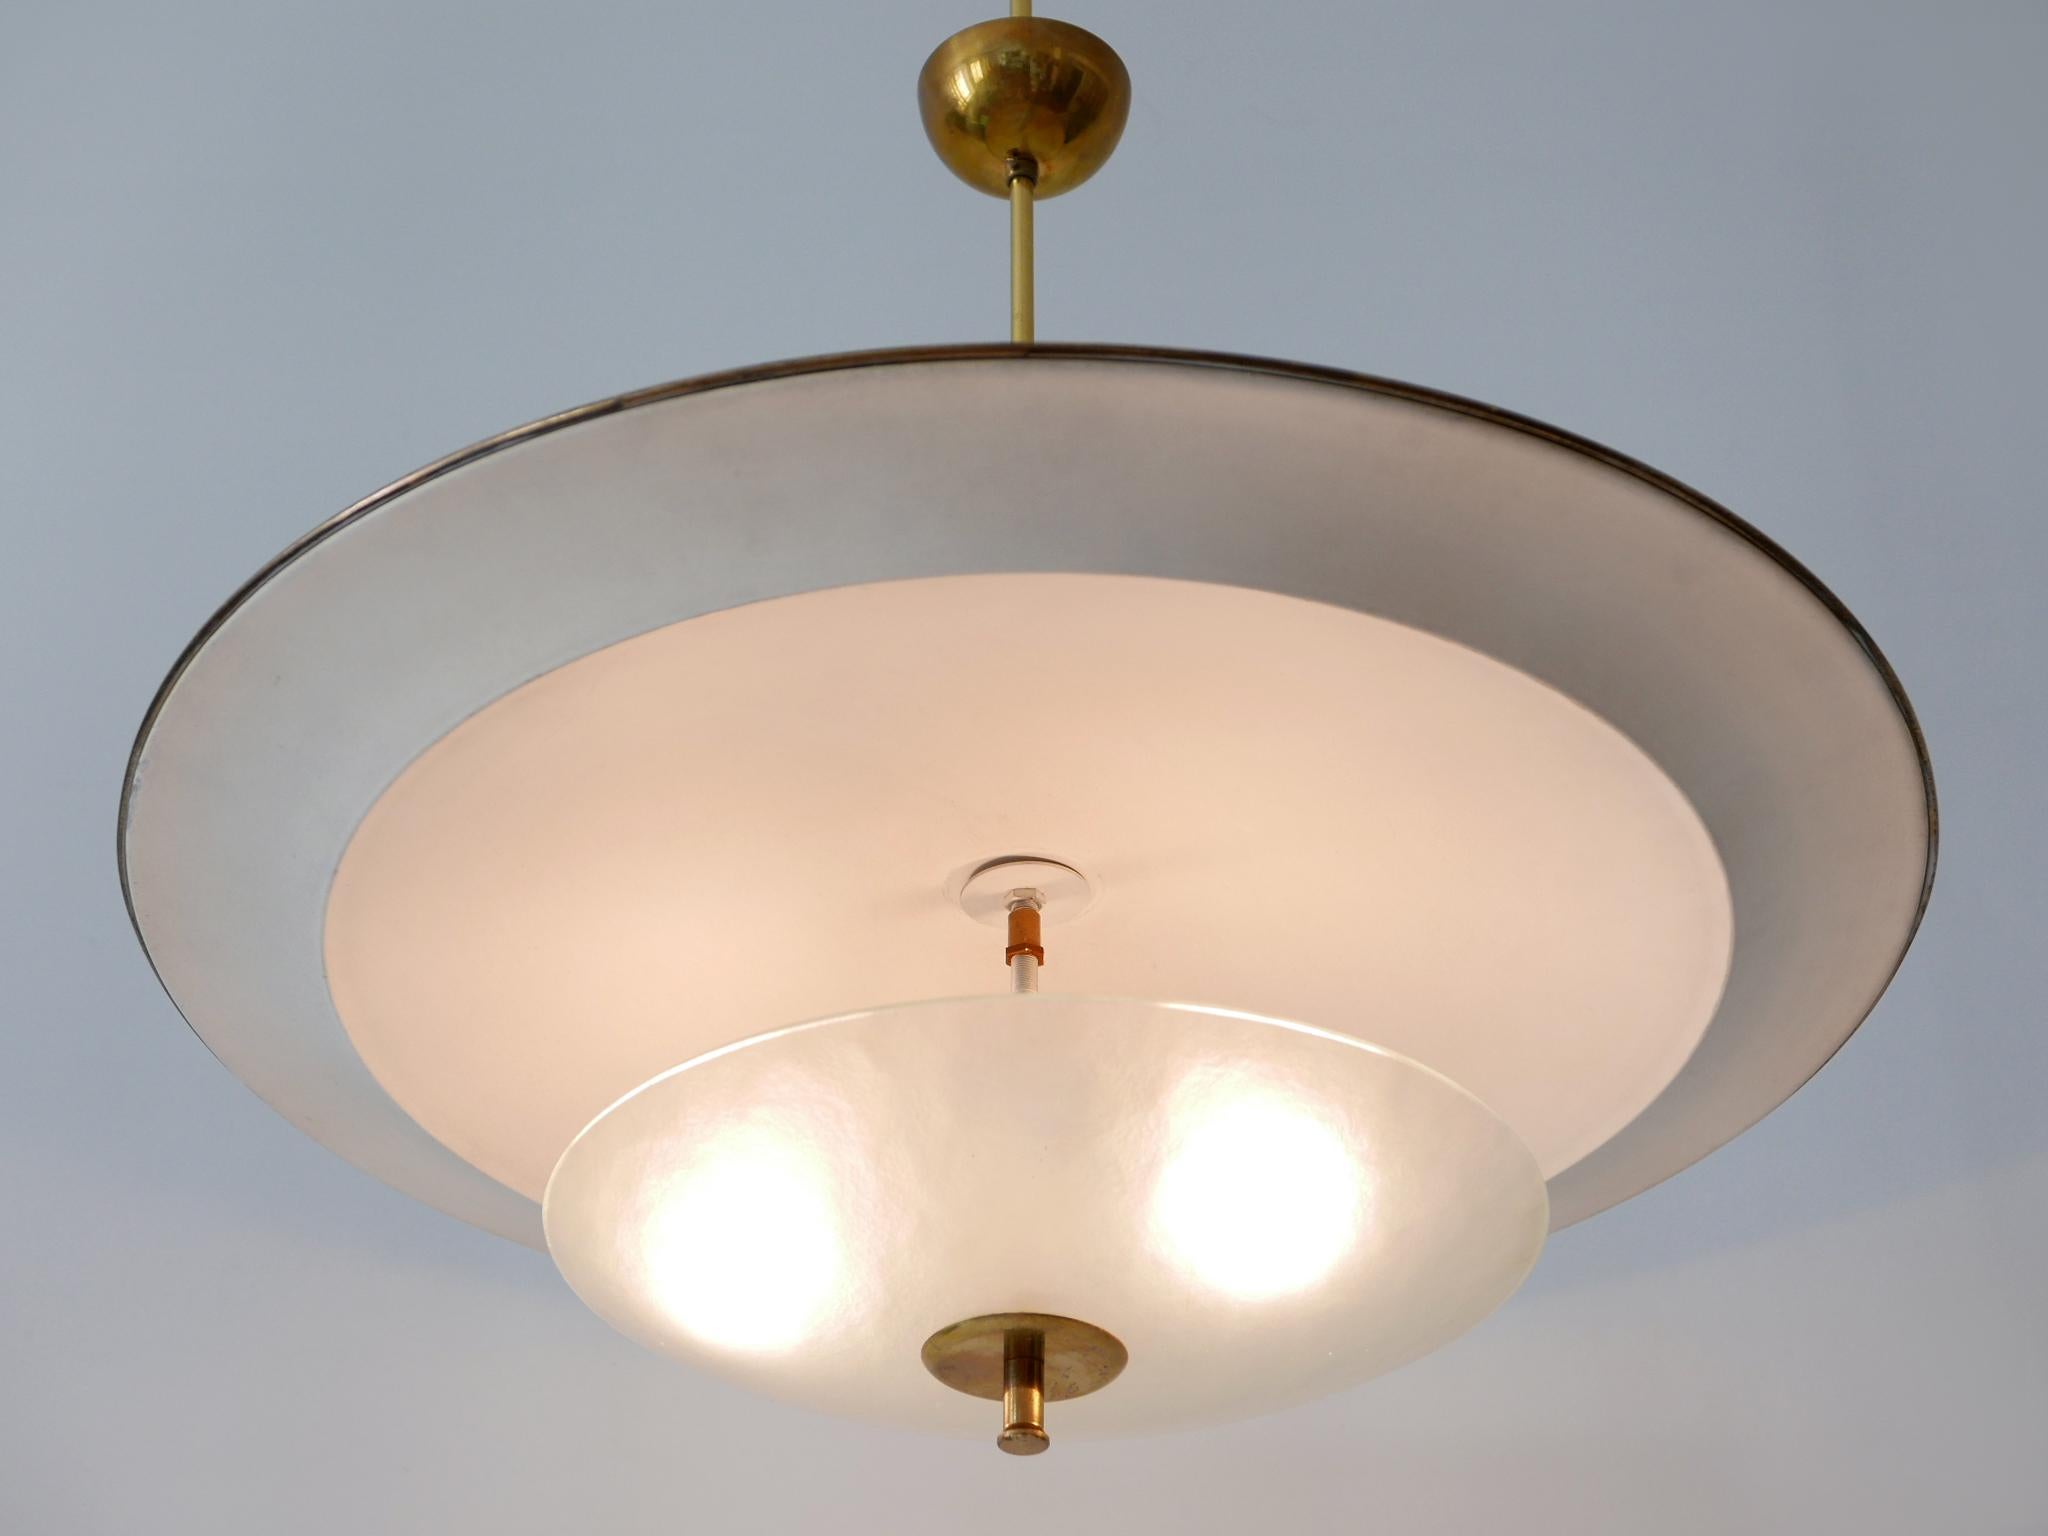 Large Mid-Century Modern 'Ufo' Ceiling Light or Pendant Lamp Germany 1950s № 3 For Sale 10